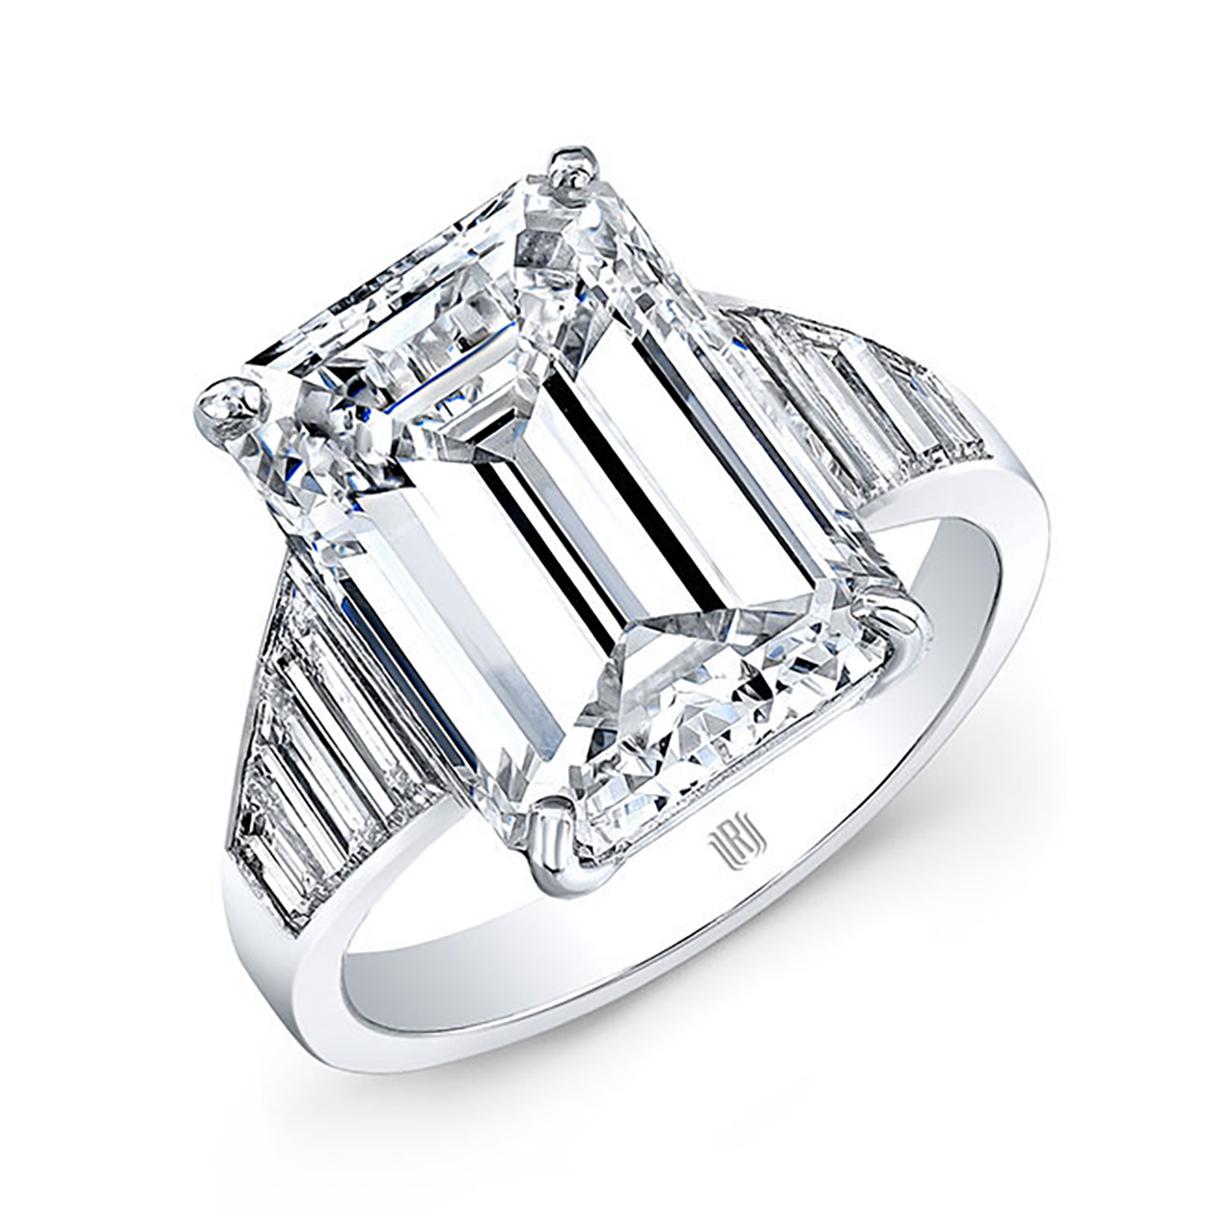 8.15 Carat Emerald Cut GIA Diamond Ring 'Platinum' In New Condition For Sale In Chestnut Hill, MA